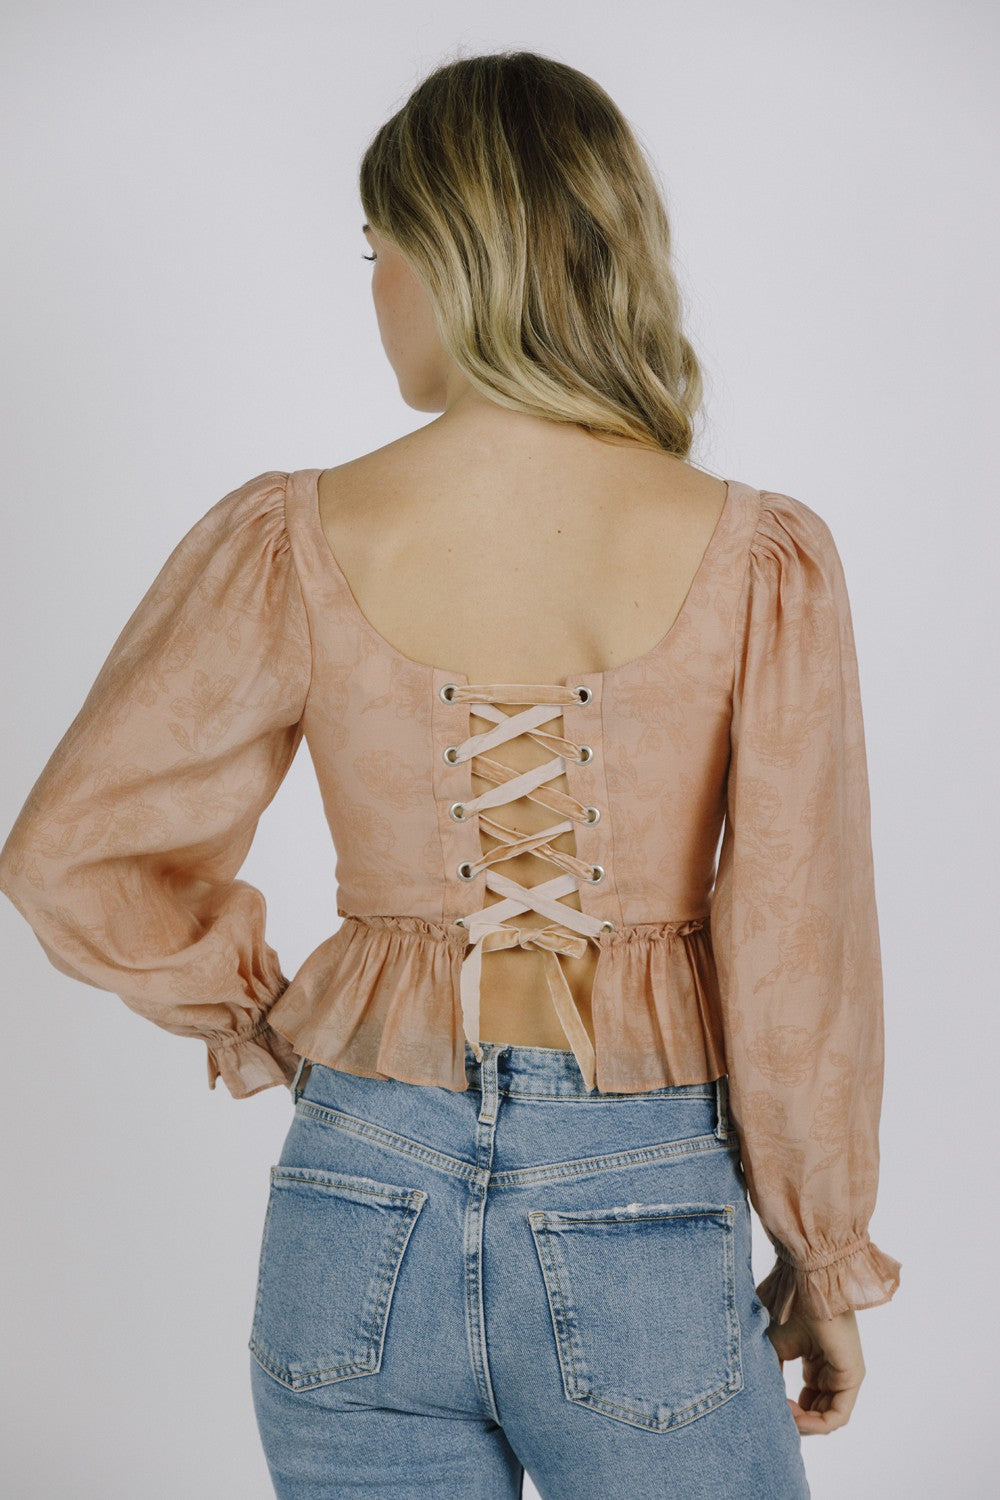 Storia | Rose Pink Long Sleeve Tied Back Top | Sweetest Stitch RVA